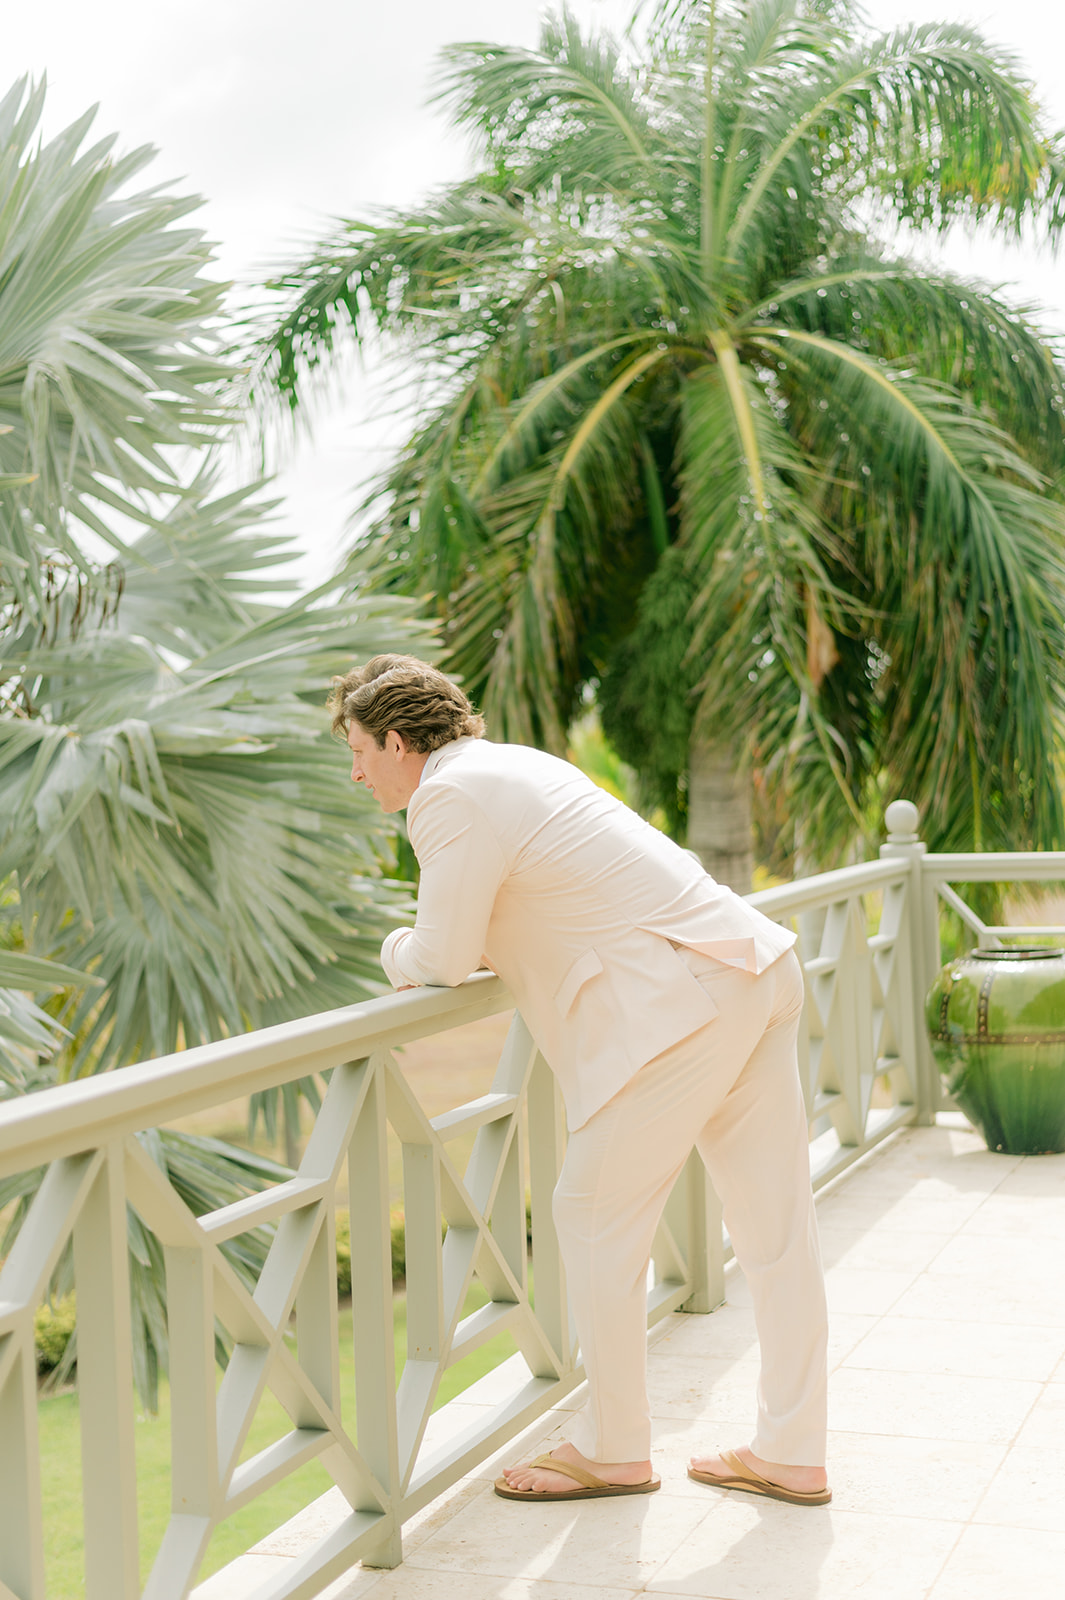 Captivating wedding videography in Antigua's stunning locations
